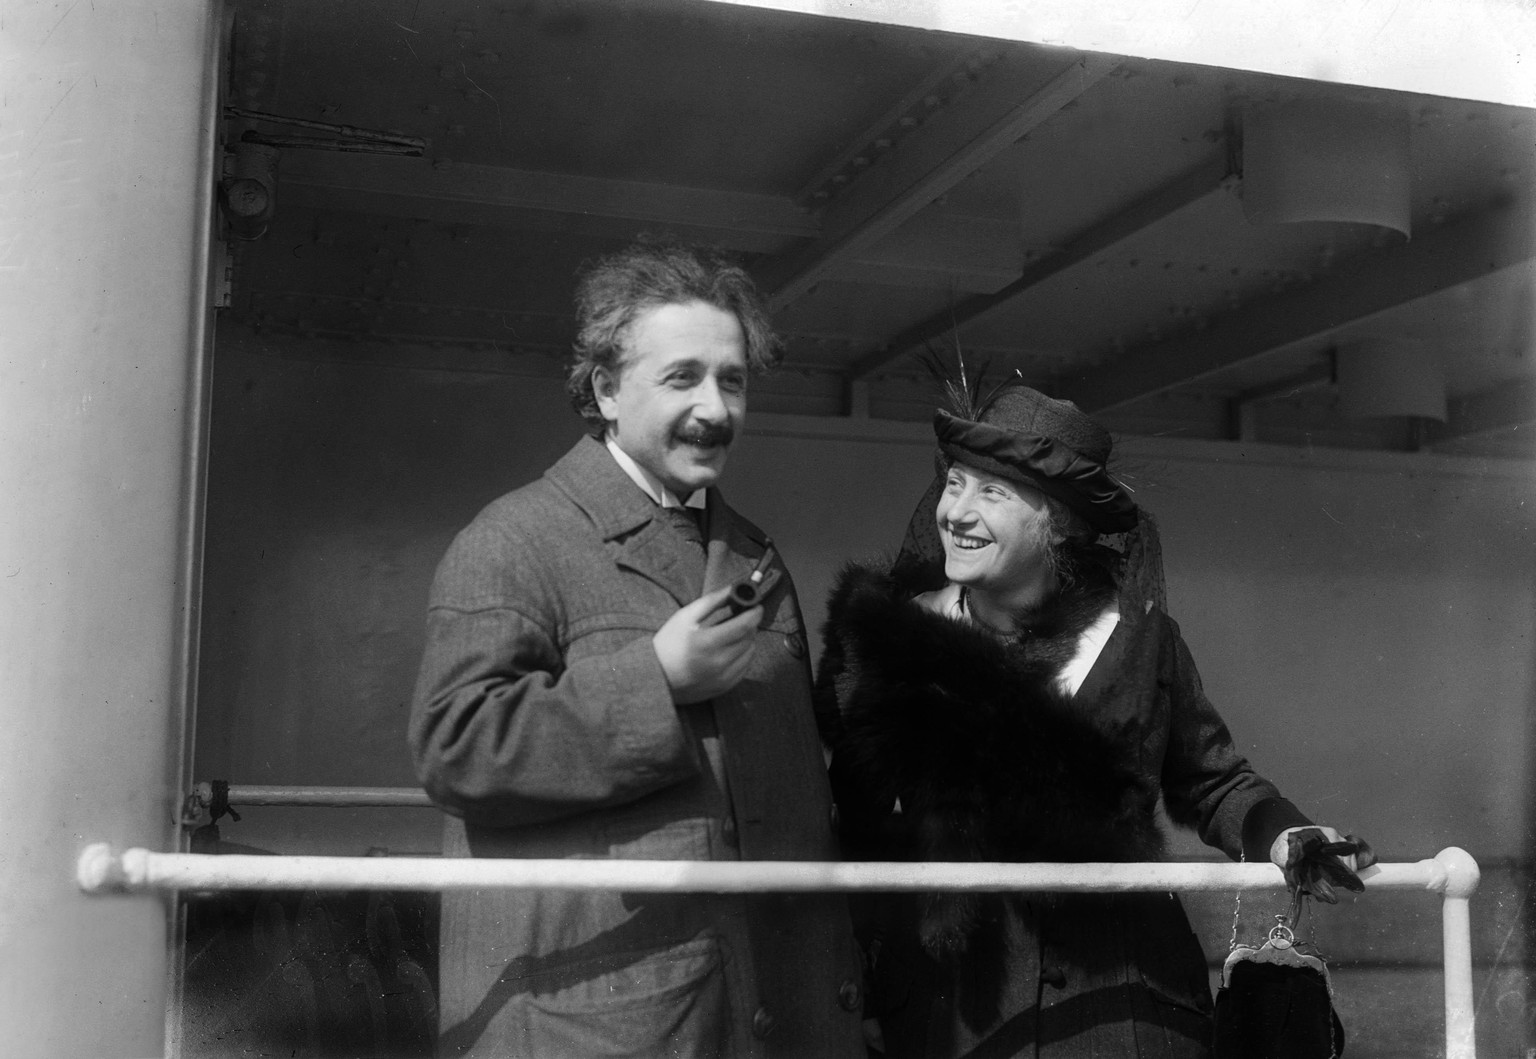 Albert Einstein (1879-1955) with his 2nd wife Elsa Lowenthal Einstein aboard a ship in April 1921. (Photo by APIC/Getty Images)